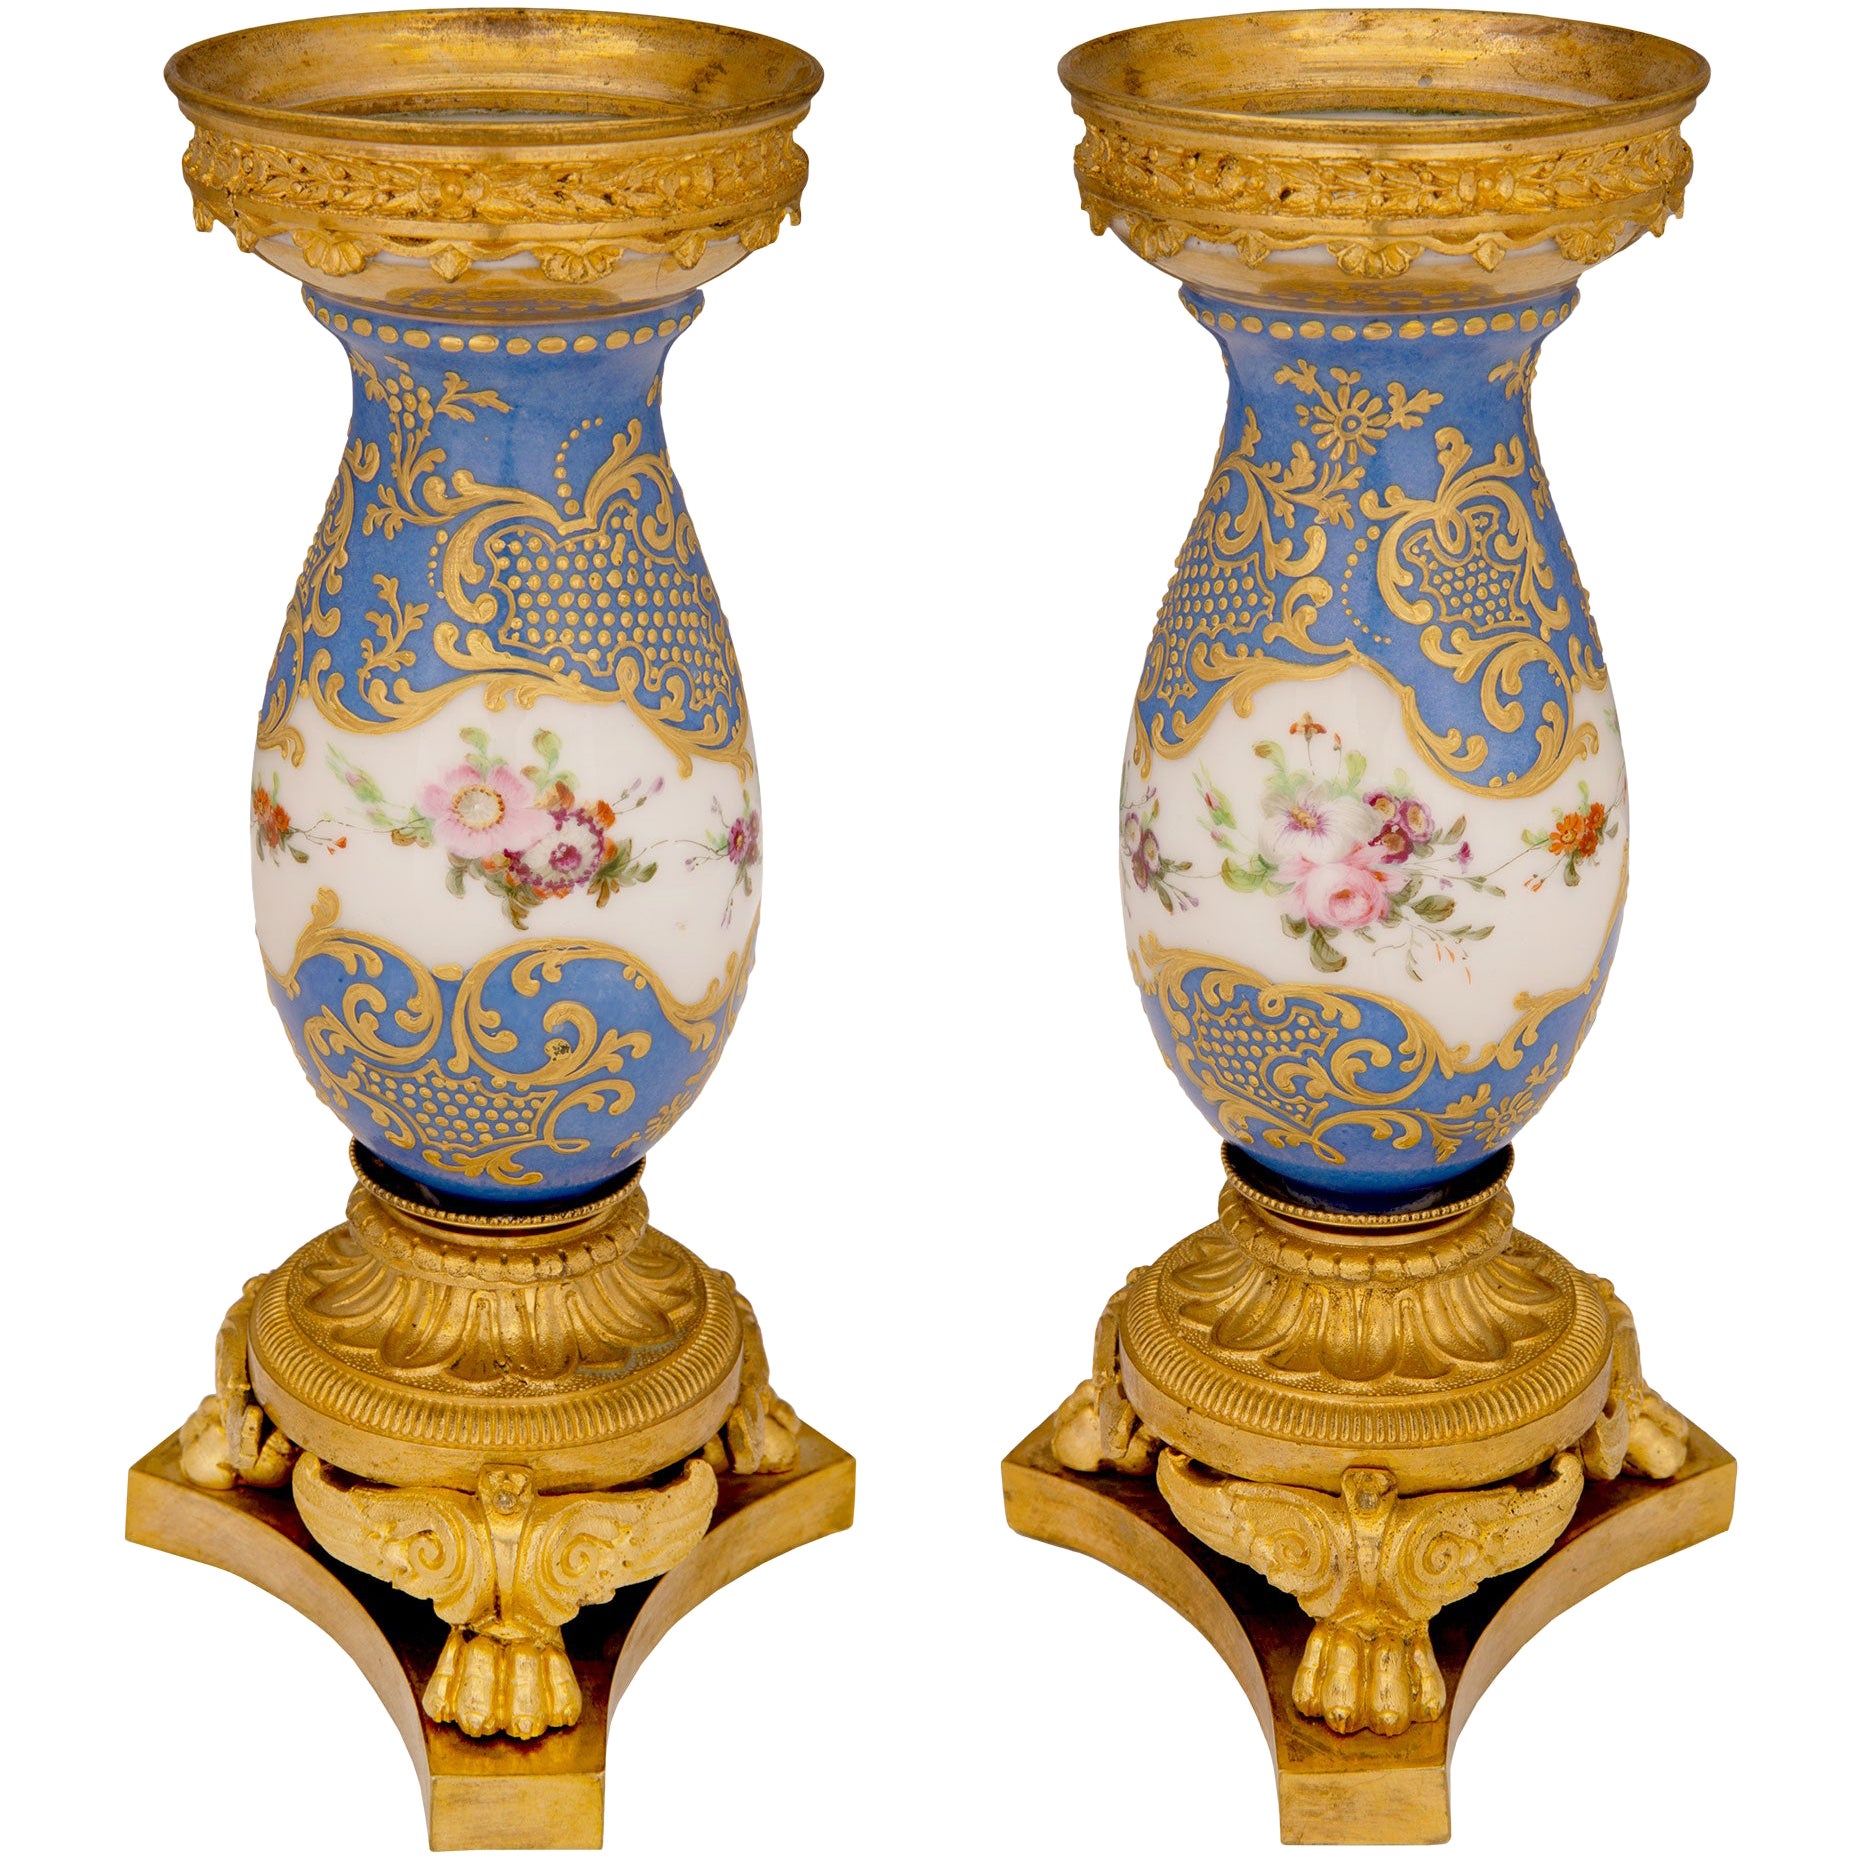 Pair Of French Early 19th Century Louis Xvi Style Sèvres Porcelain Vases For Sale At 1stdibs 